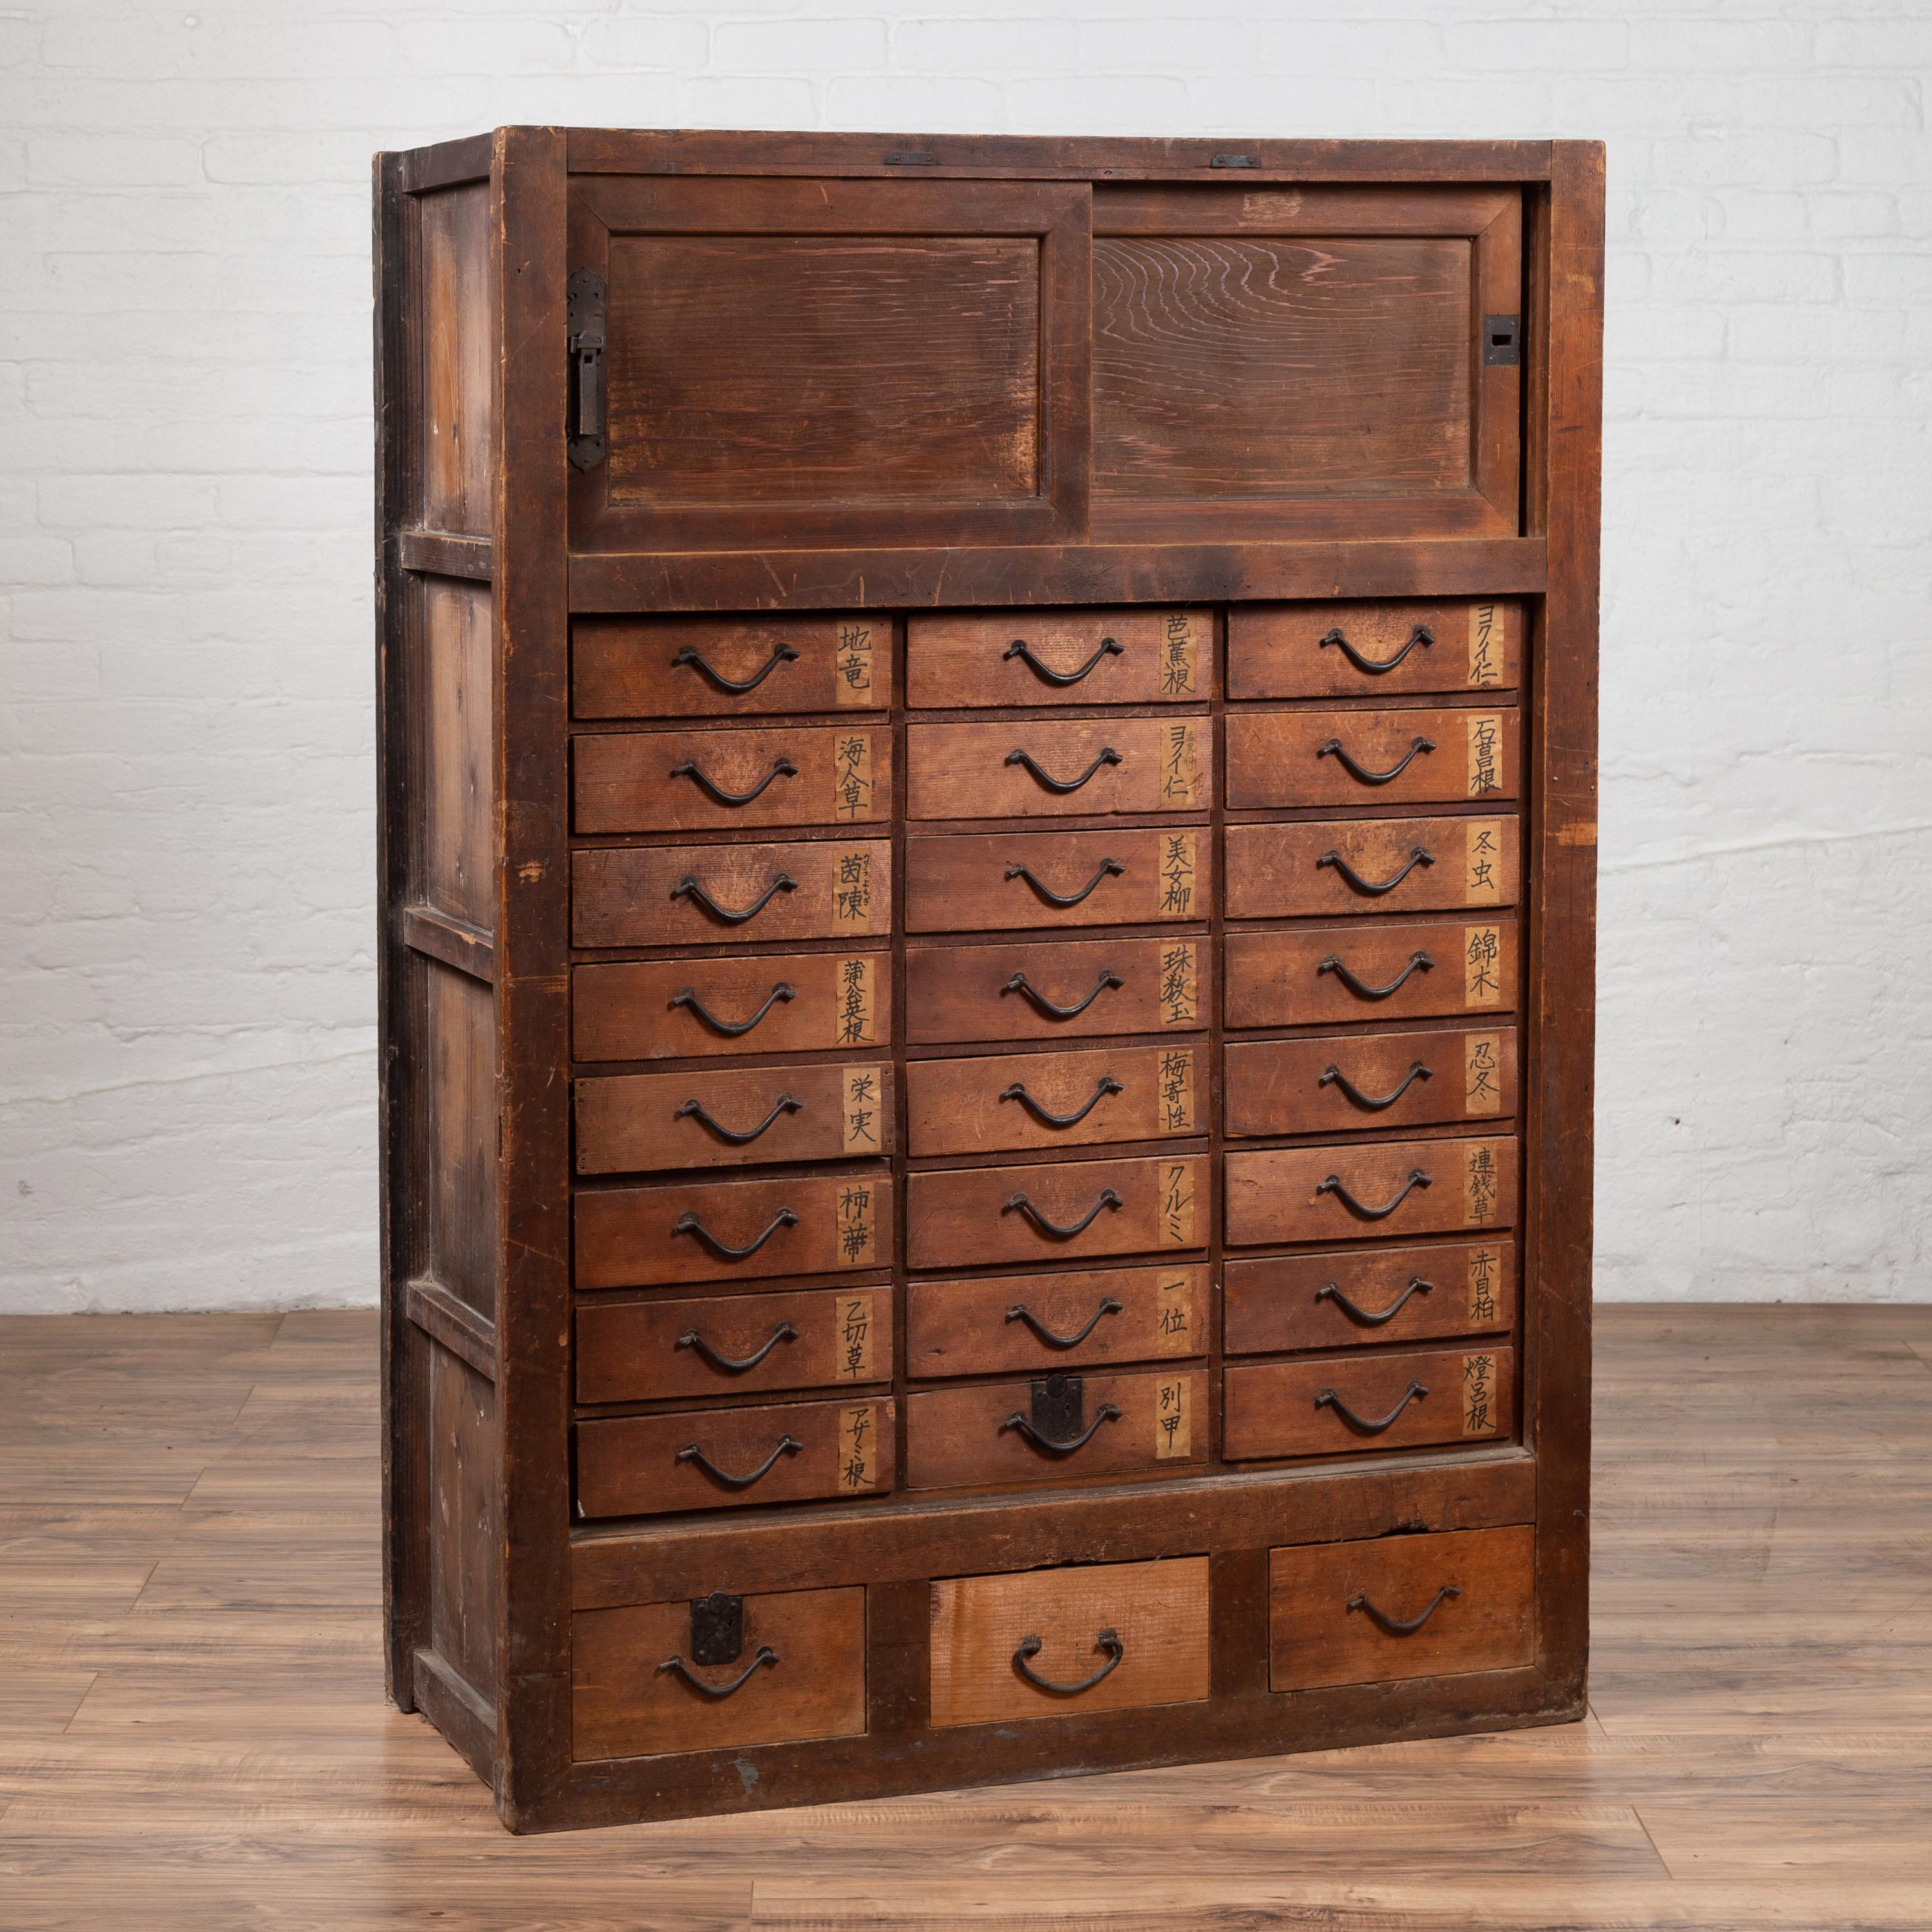 Japanese 19th Century Meiji Period Apothecary Cabinet with 27 Drawers and Doors 2